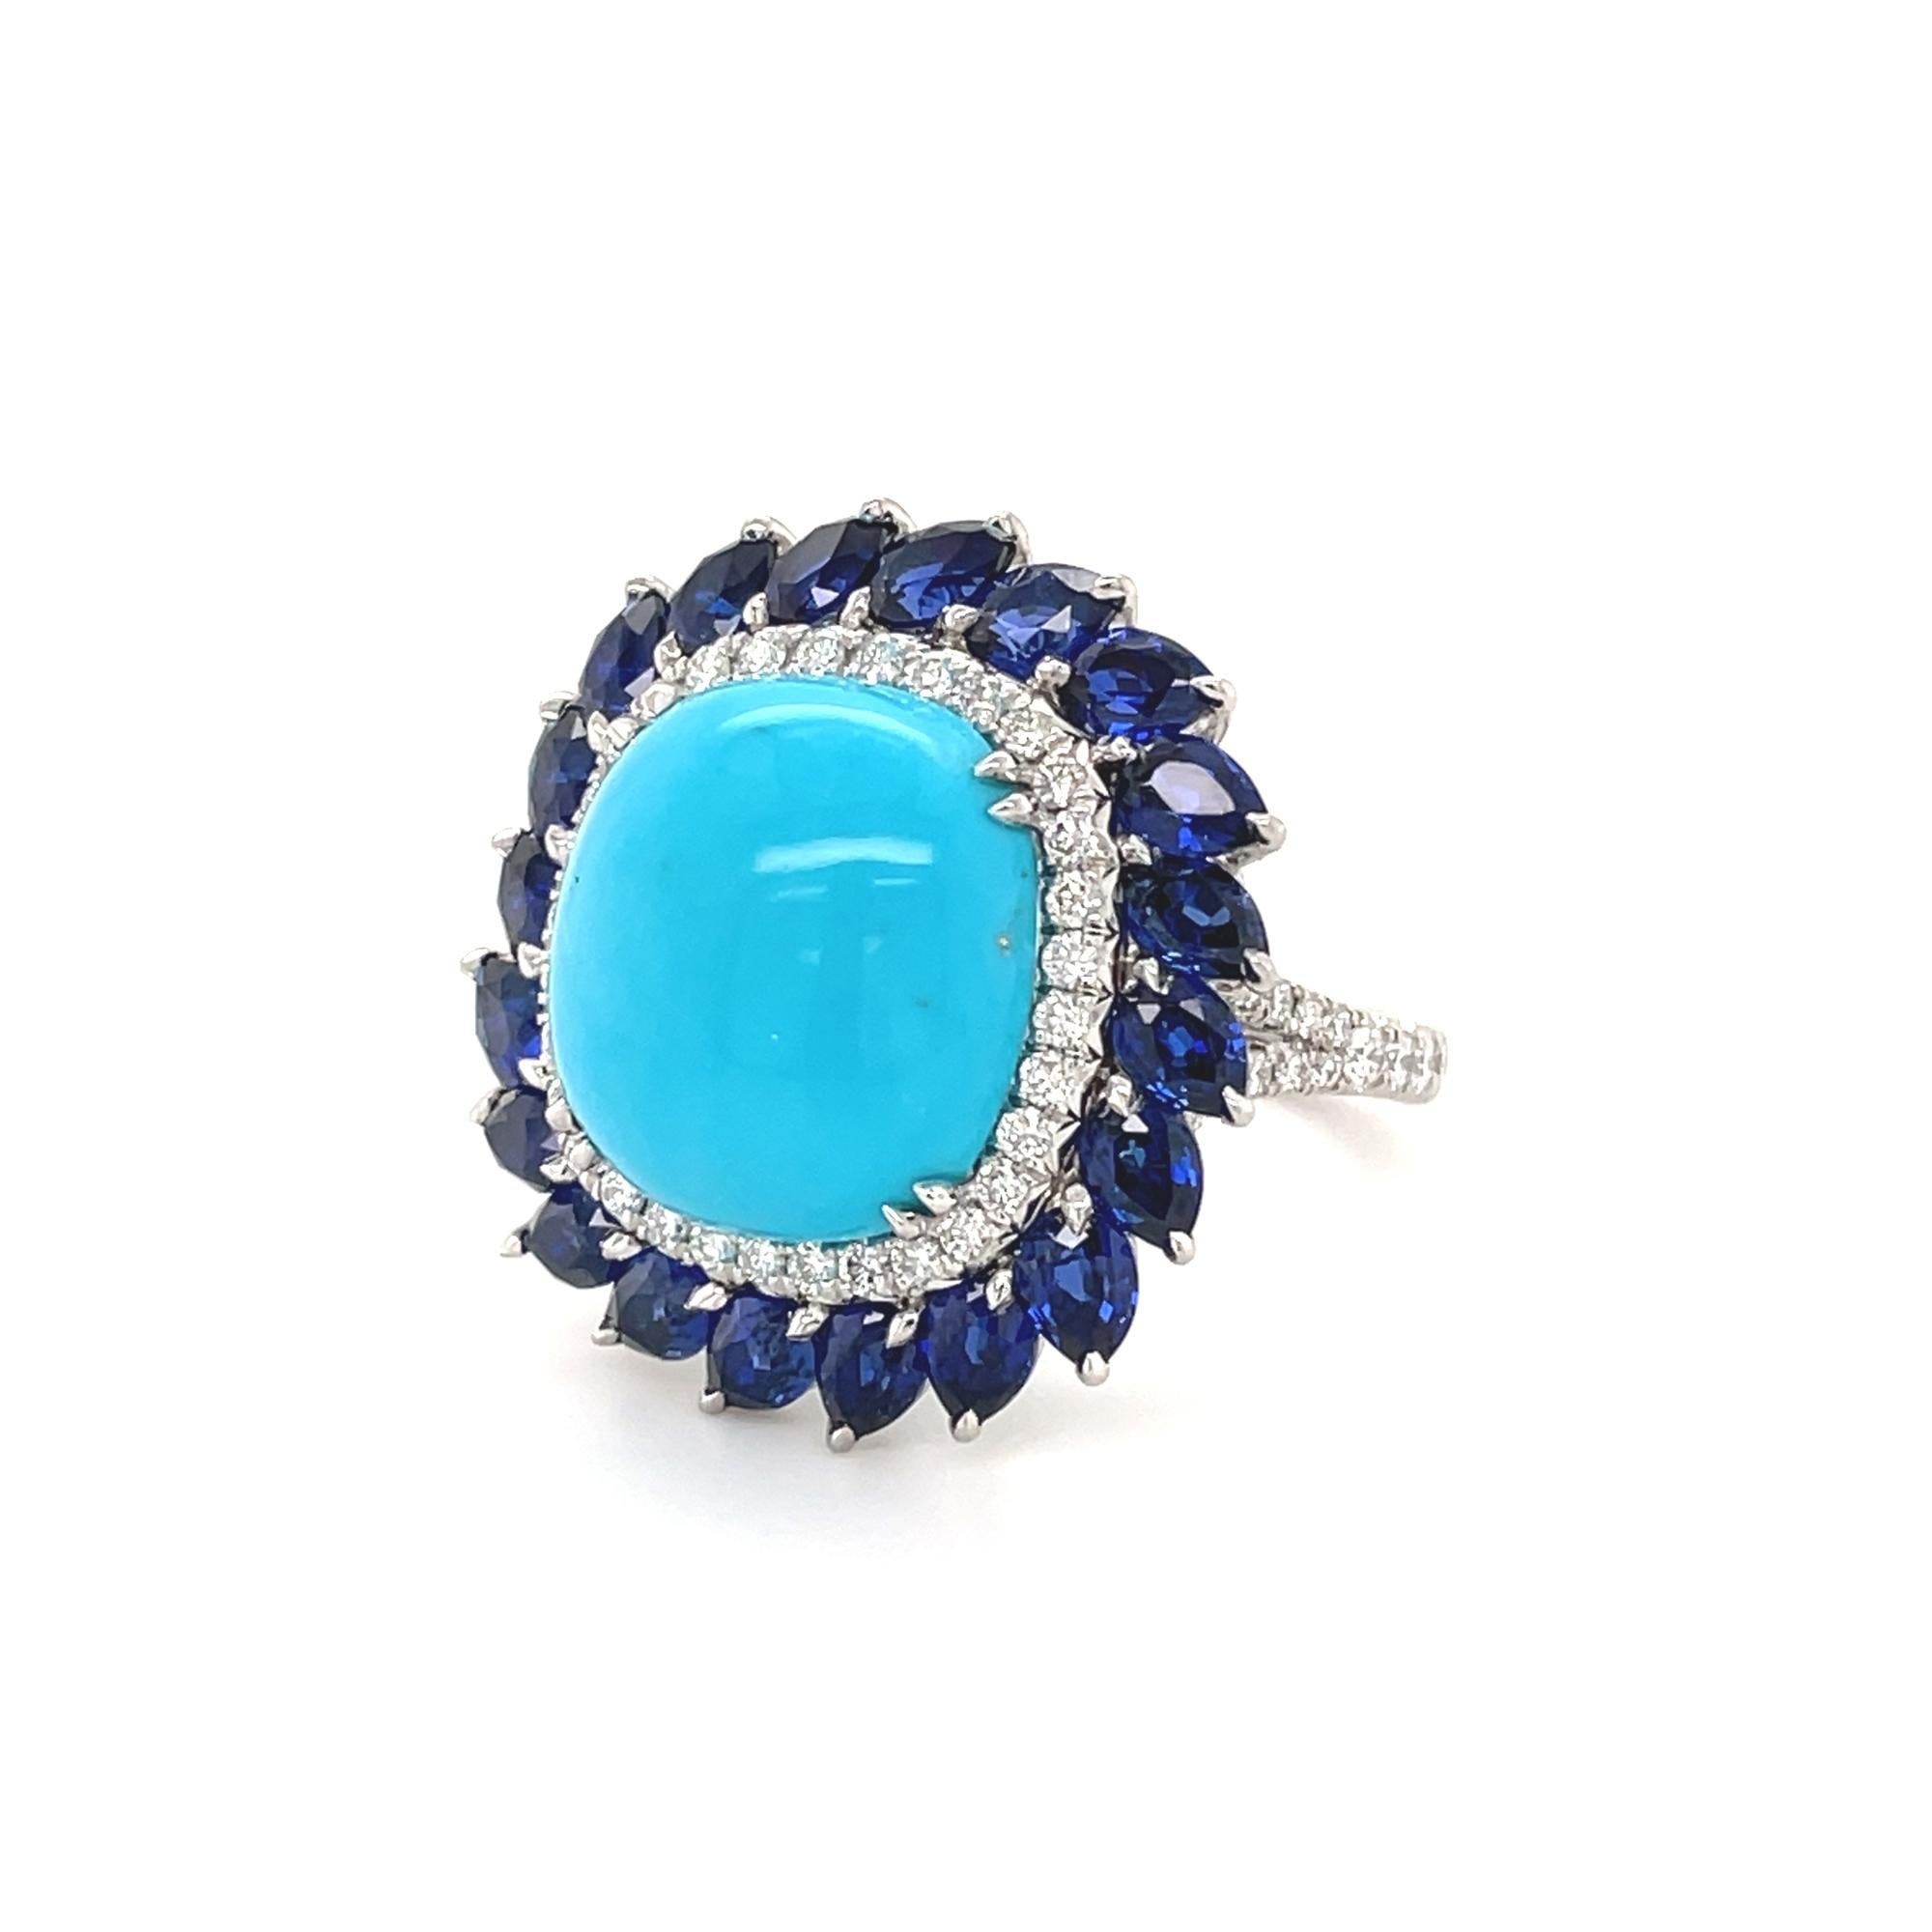 This beautiful cocktail ring features a prong set center blue cabochon turquoise stone weighing 11.60cts. Surrounded by a halo of dazzling round brilliant cut diamonds weighing 1.20cts and pear shaped Blue Sapphires in prong setting weighing